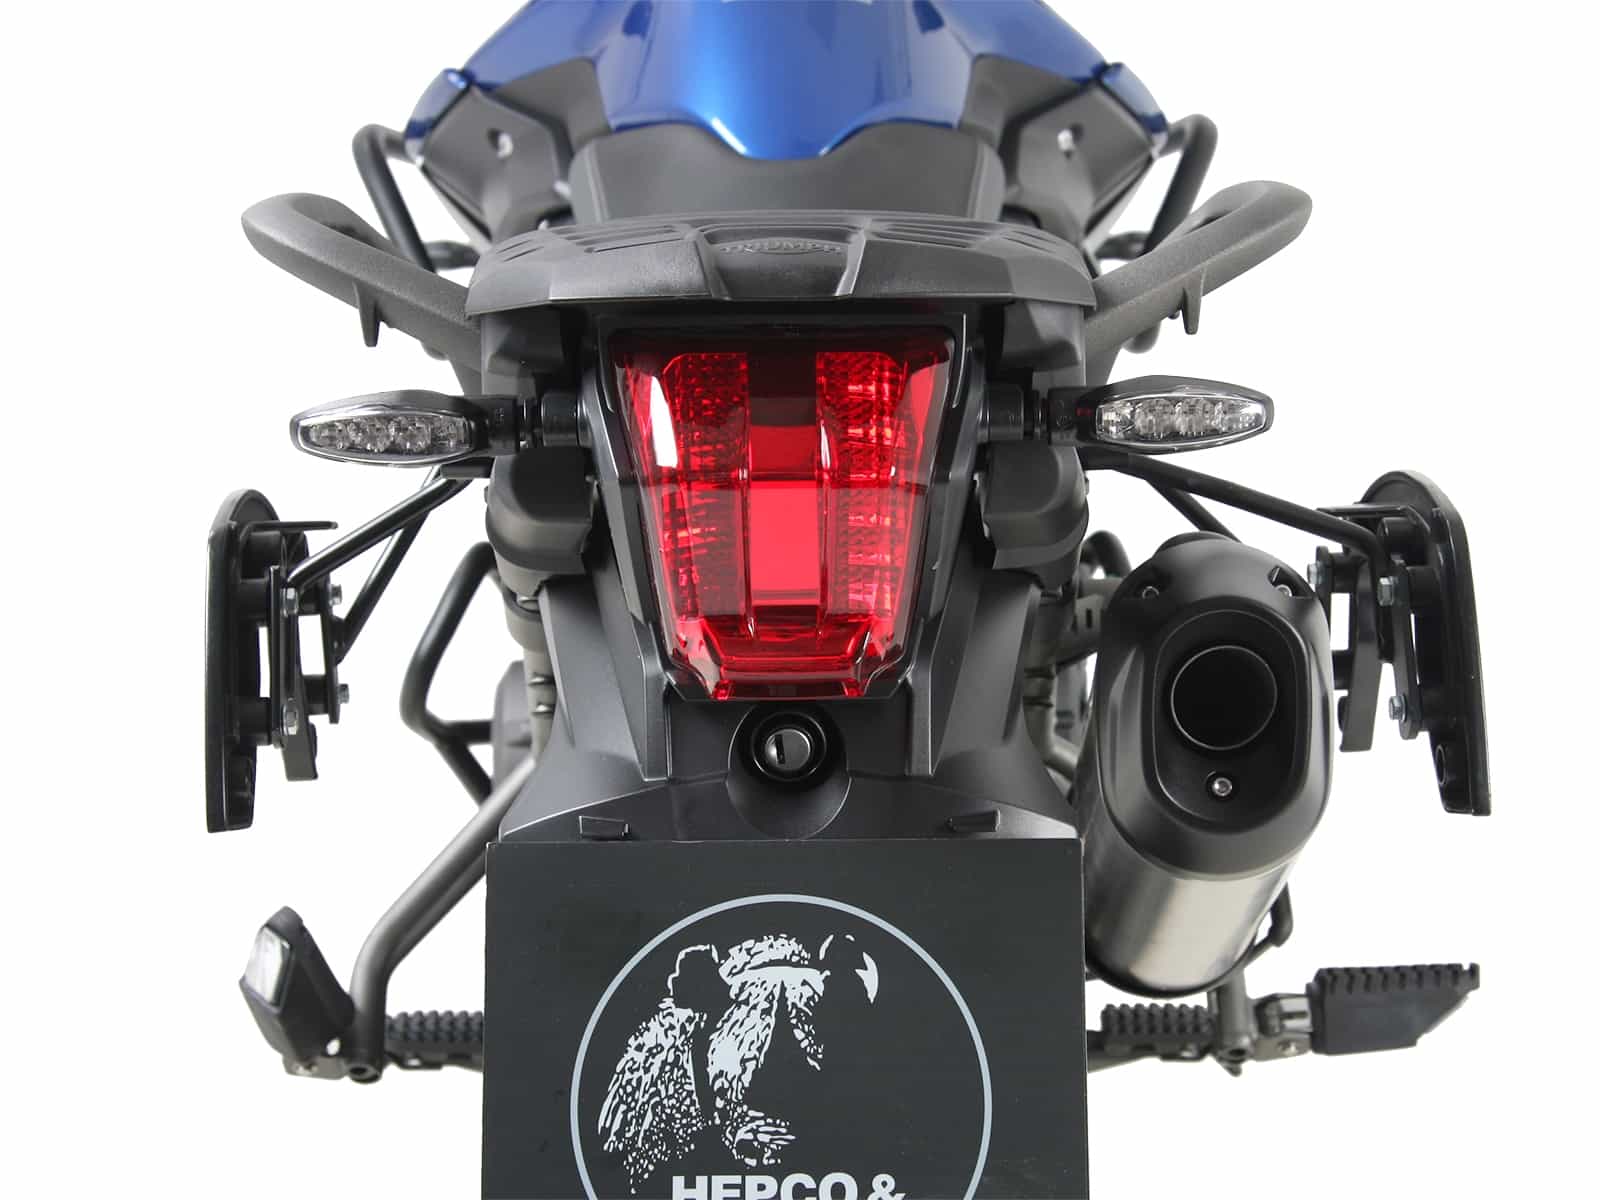 C-Bow sidecarrier for Triumph Tiger 800 XR / XRX / XRT / XC / XCX / XCA (2018-)